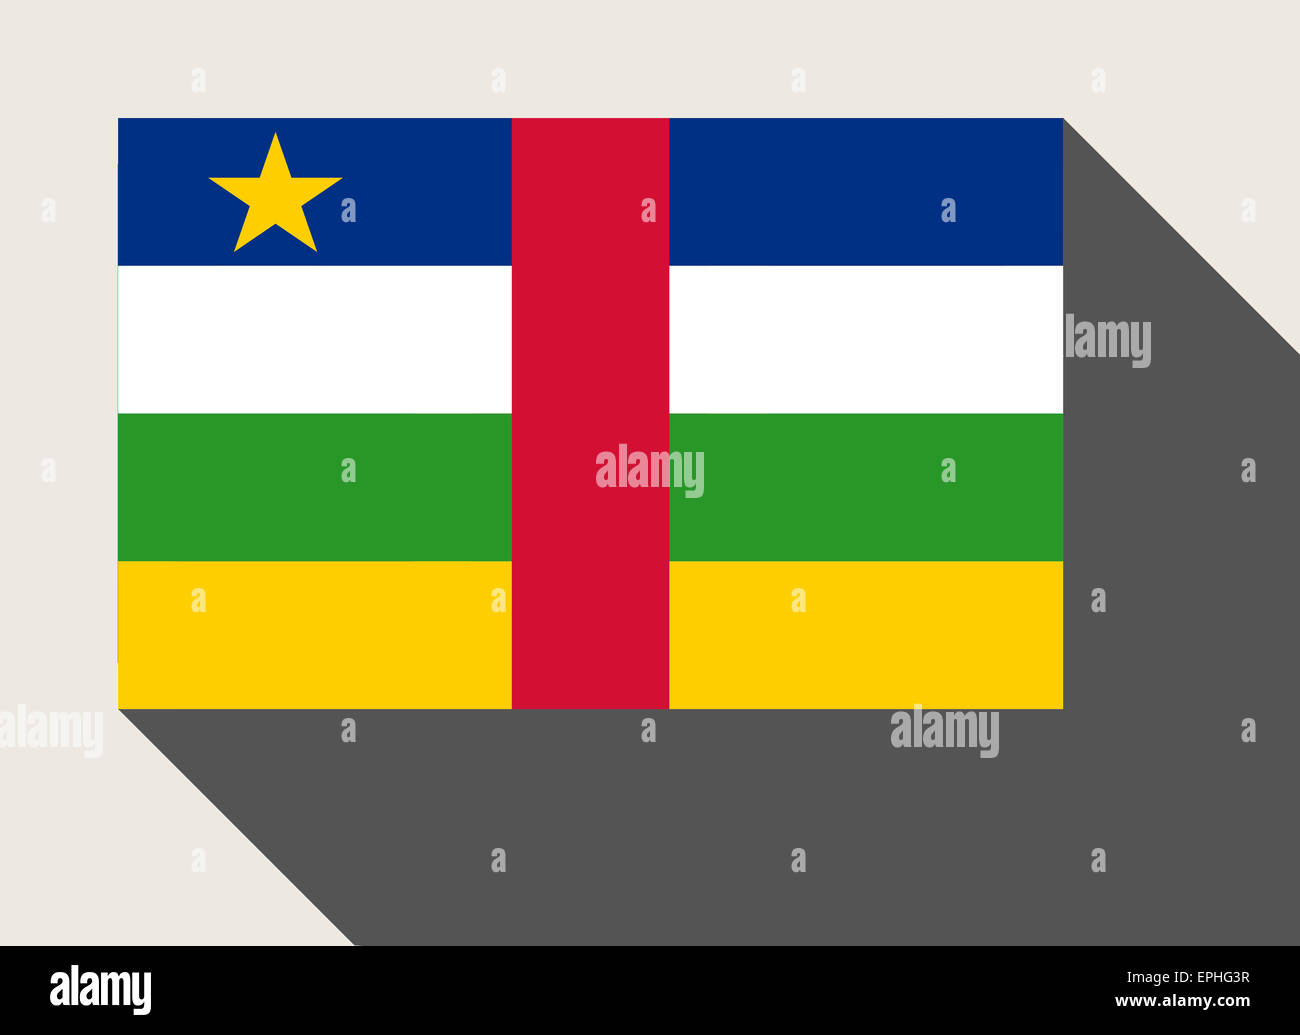 Central African Republic flag in flat web design style. Stock Photo